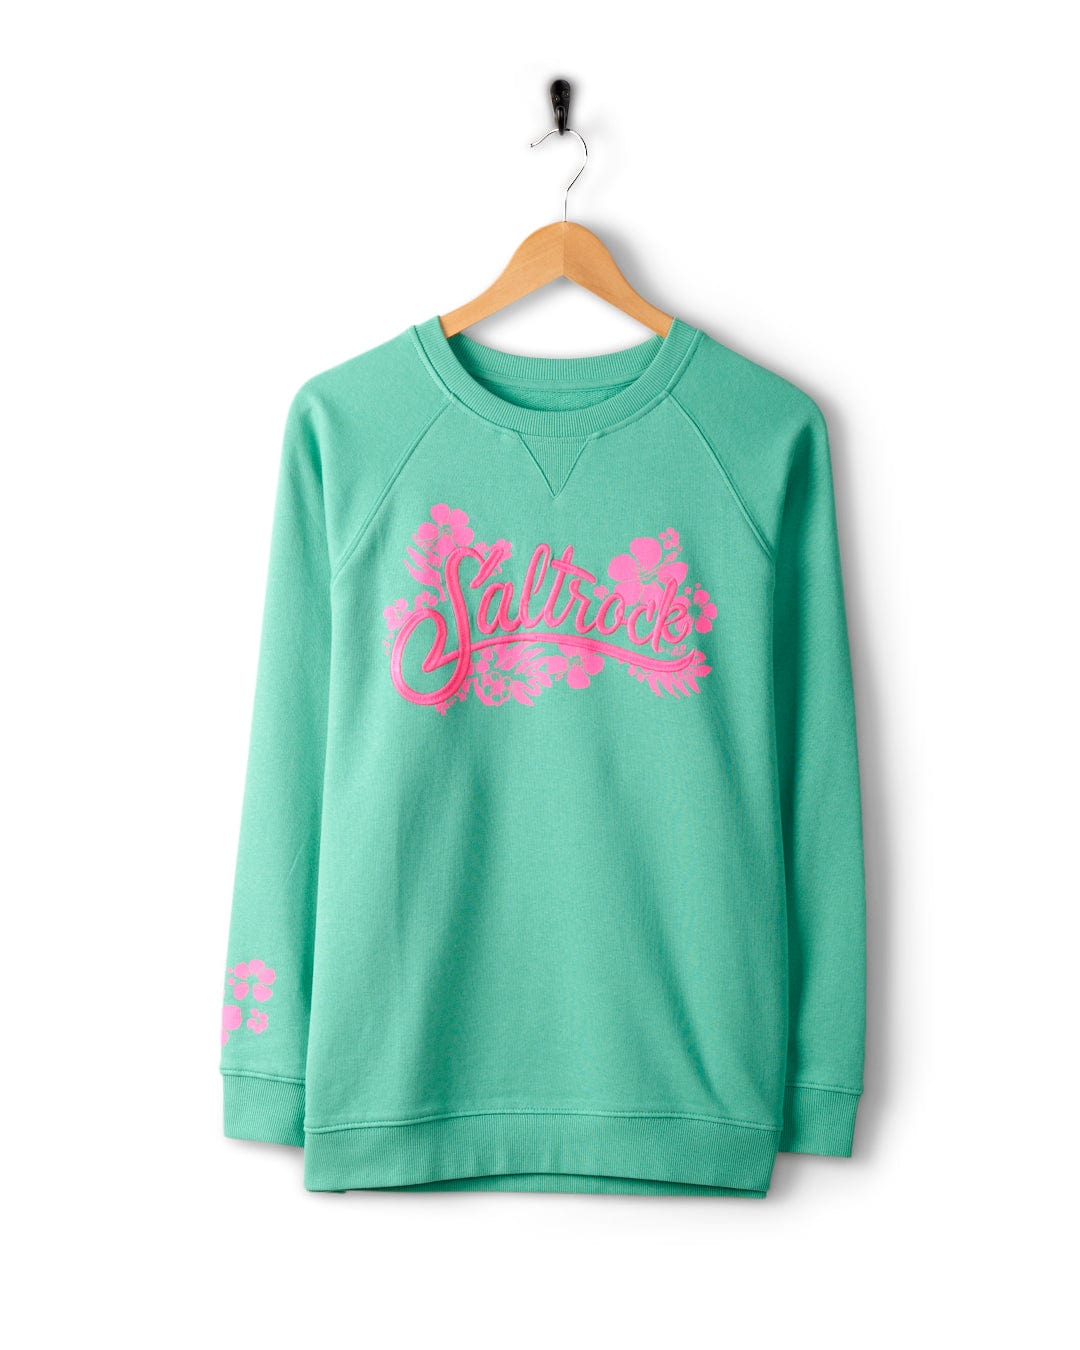 A green sweatshirt made of 100% cotton, featuring Saltrock branding and a pink floral design printed on the front, hangs on a wooden hanger against a white background. The Tropic - Womens Sweat - Green by Saltrock is machine washable for easy care.